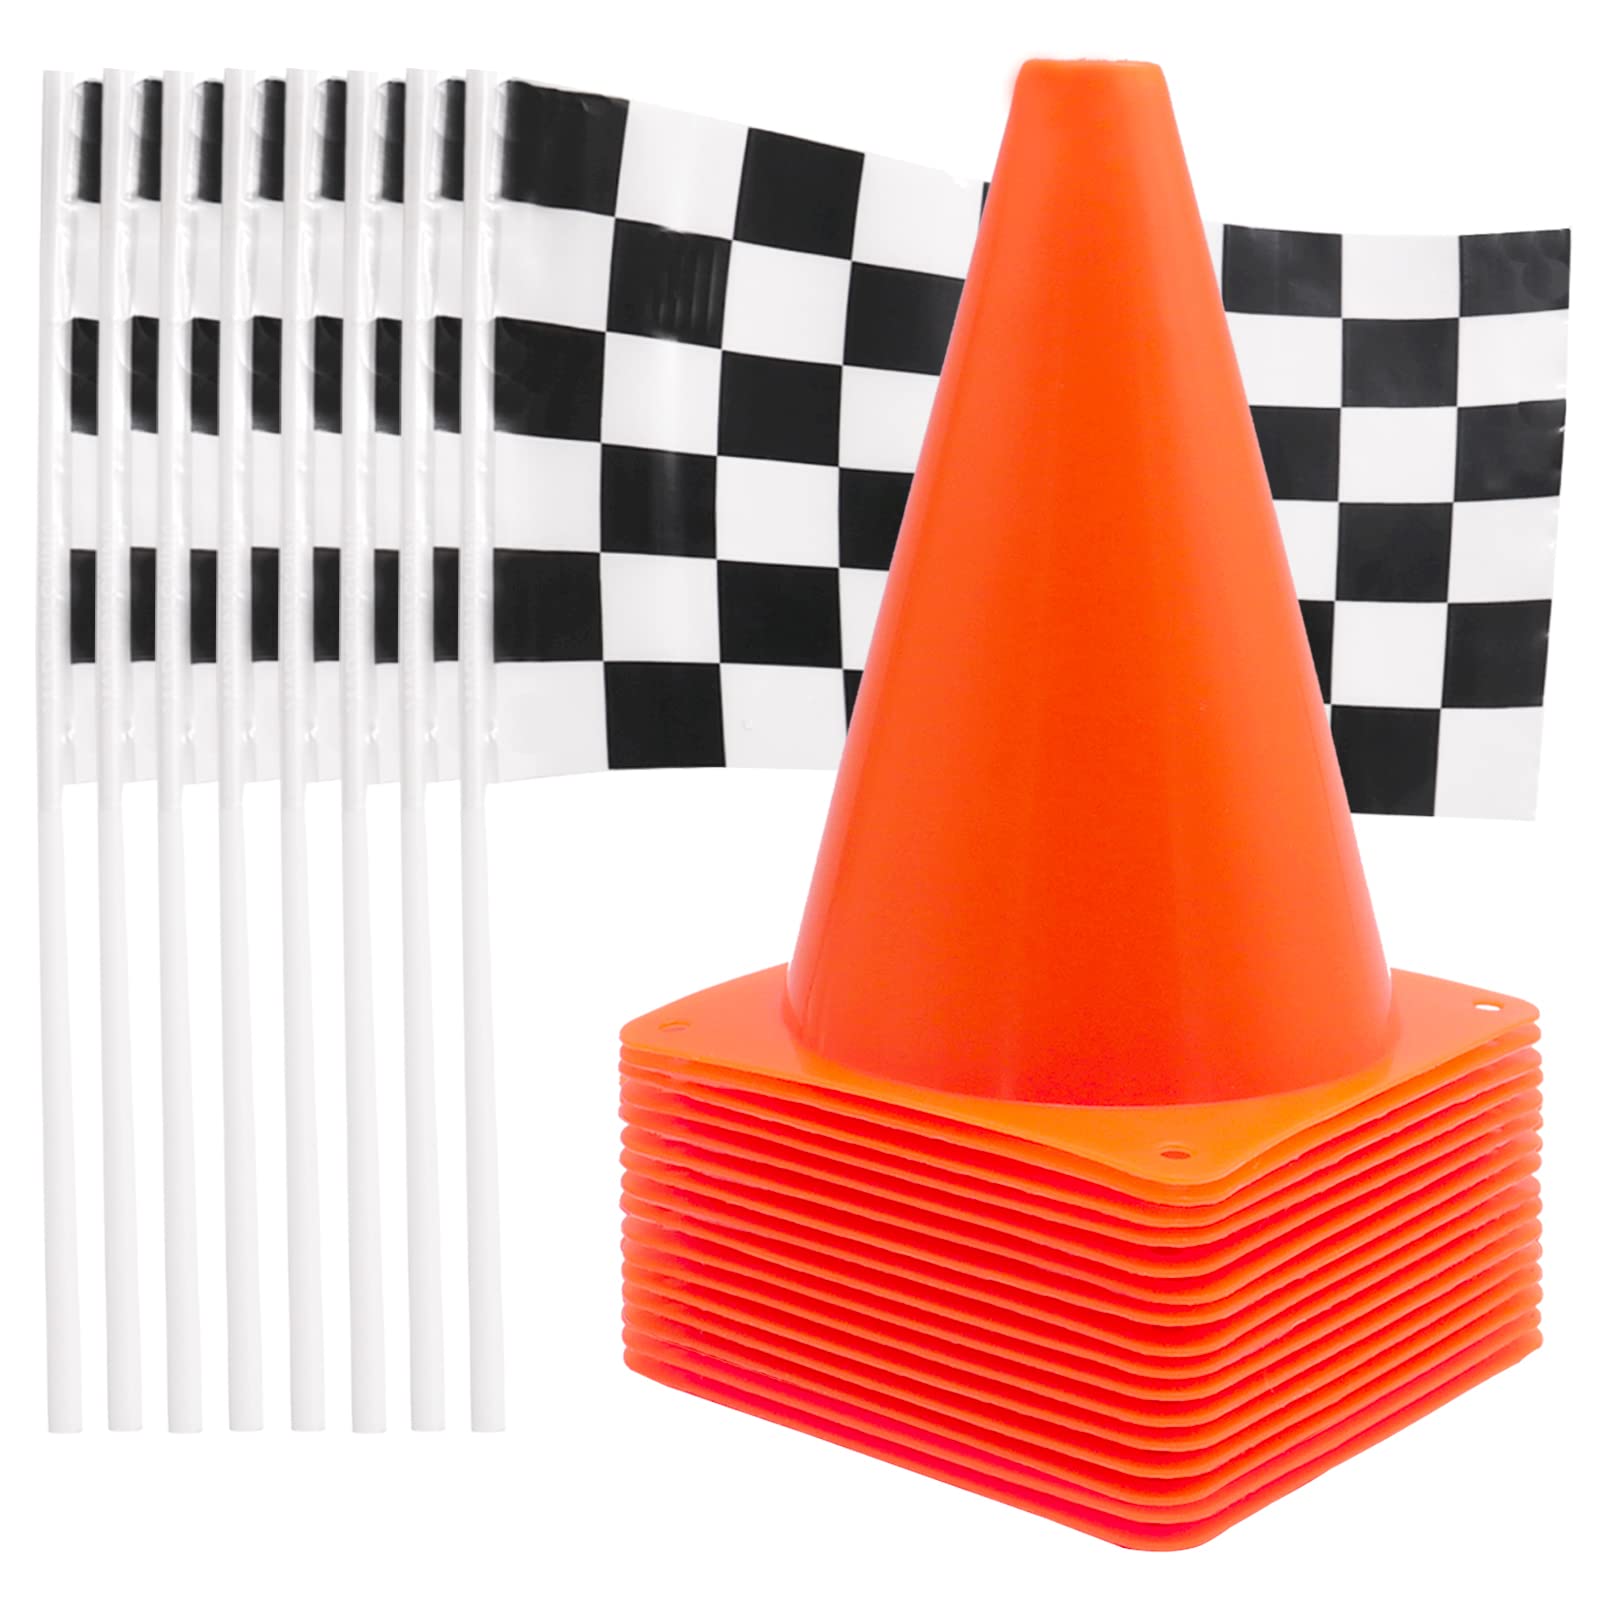 Panxxsen 40 Pcs Traffic Cones and Racing Checkered Flags,20-7 Inch Sports Cones and 20 Black and White Flags with Sticks,Racing Car Party Supplies Kids Birthday Party Decorations